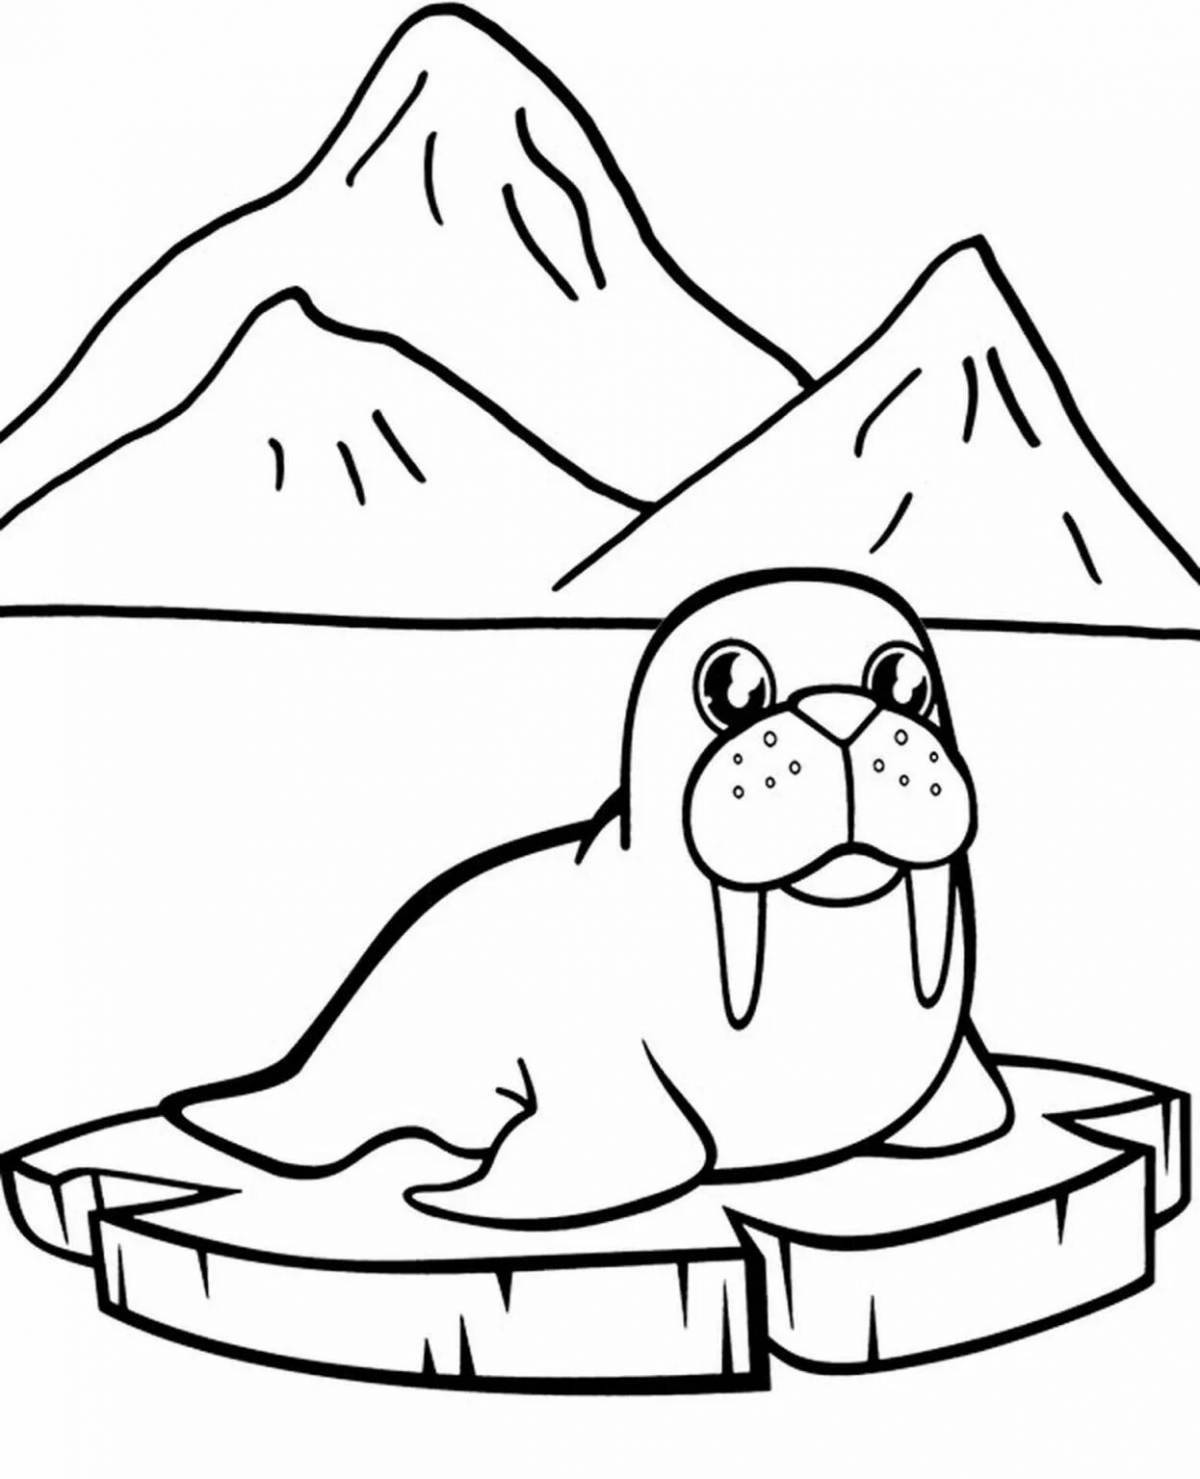 Animated coloring pages of penguins and polar bears